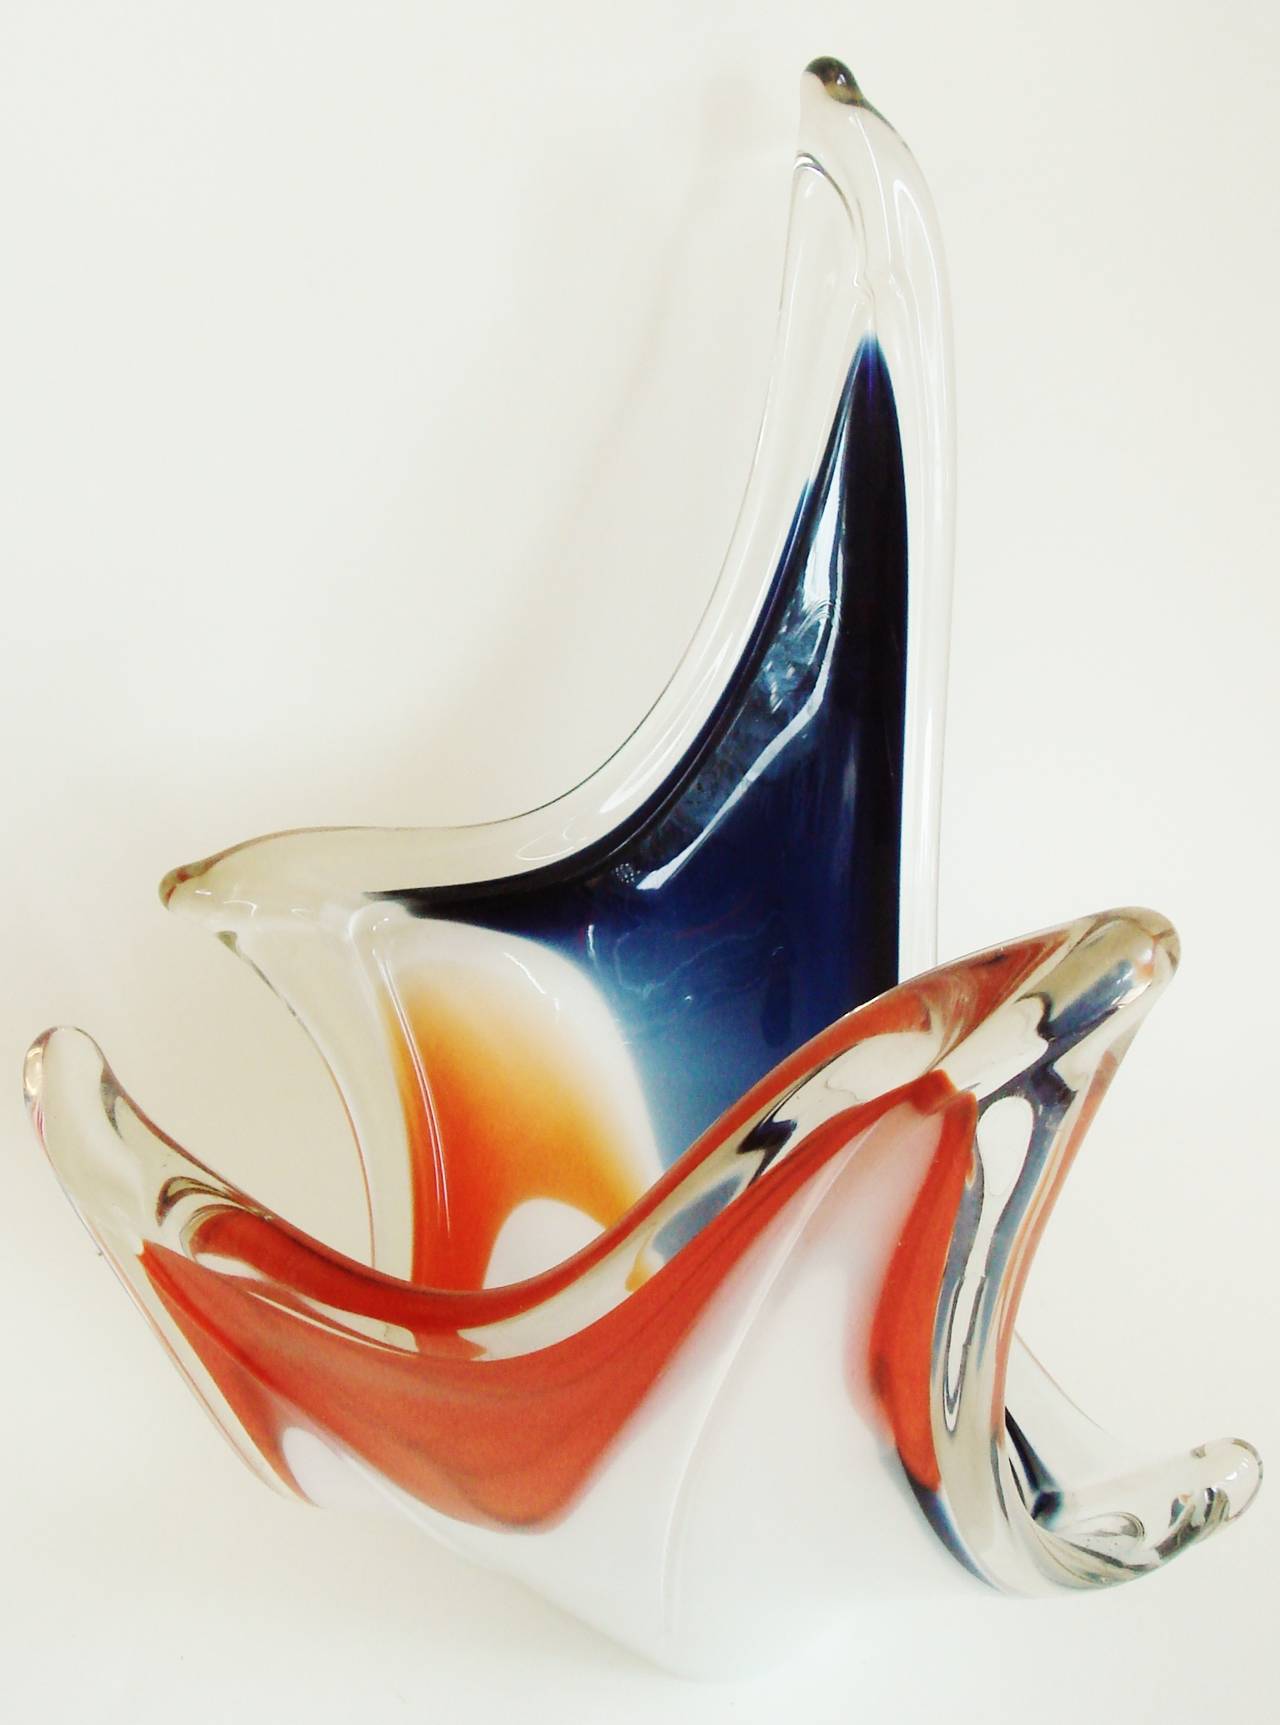 This wonderful Swedish Mid-Century Modern vide-poche/vase is an eccentric riot of blue, orange, white and clear glass in a free-form shape that is somewhat reminiscent of a butterfly in flight. It is unsigned but very much in the style of a